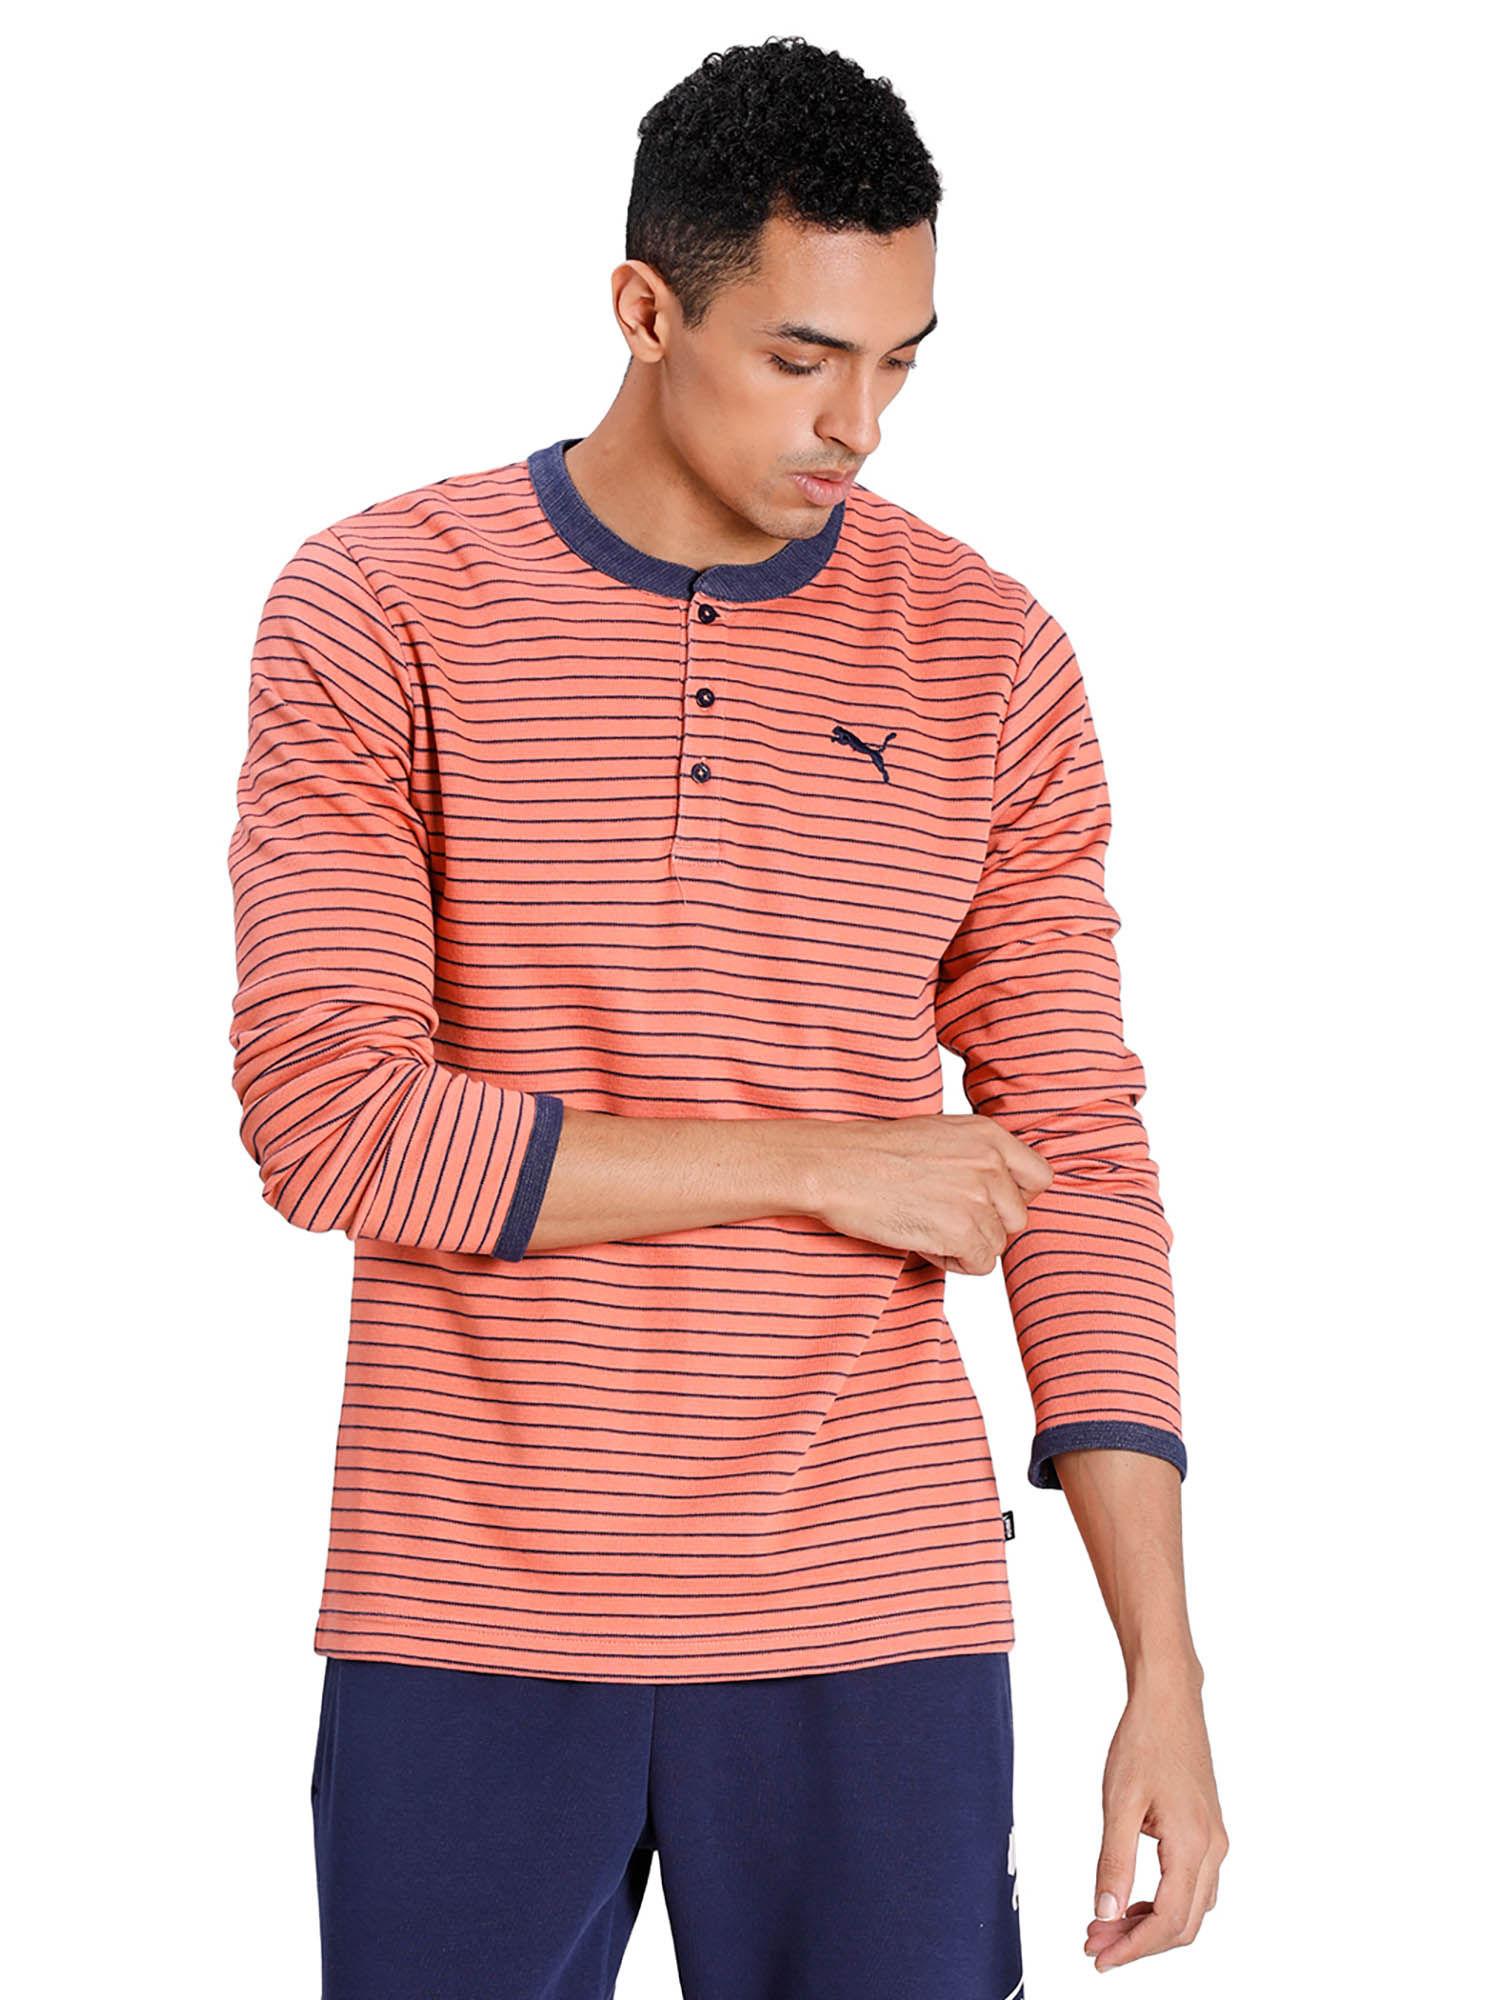 coral-stripes-sweater